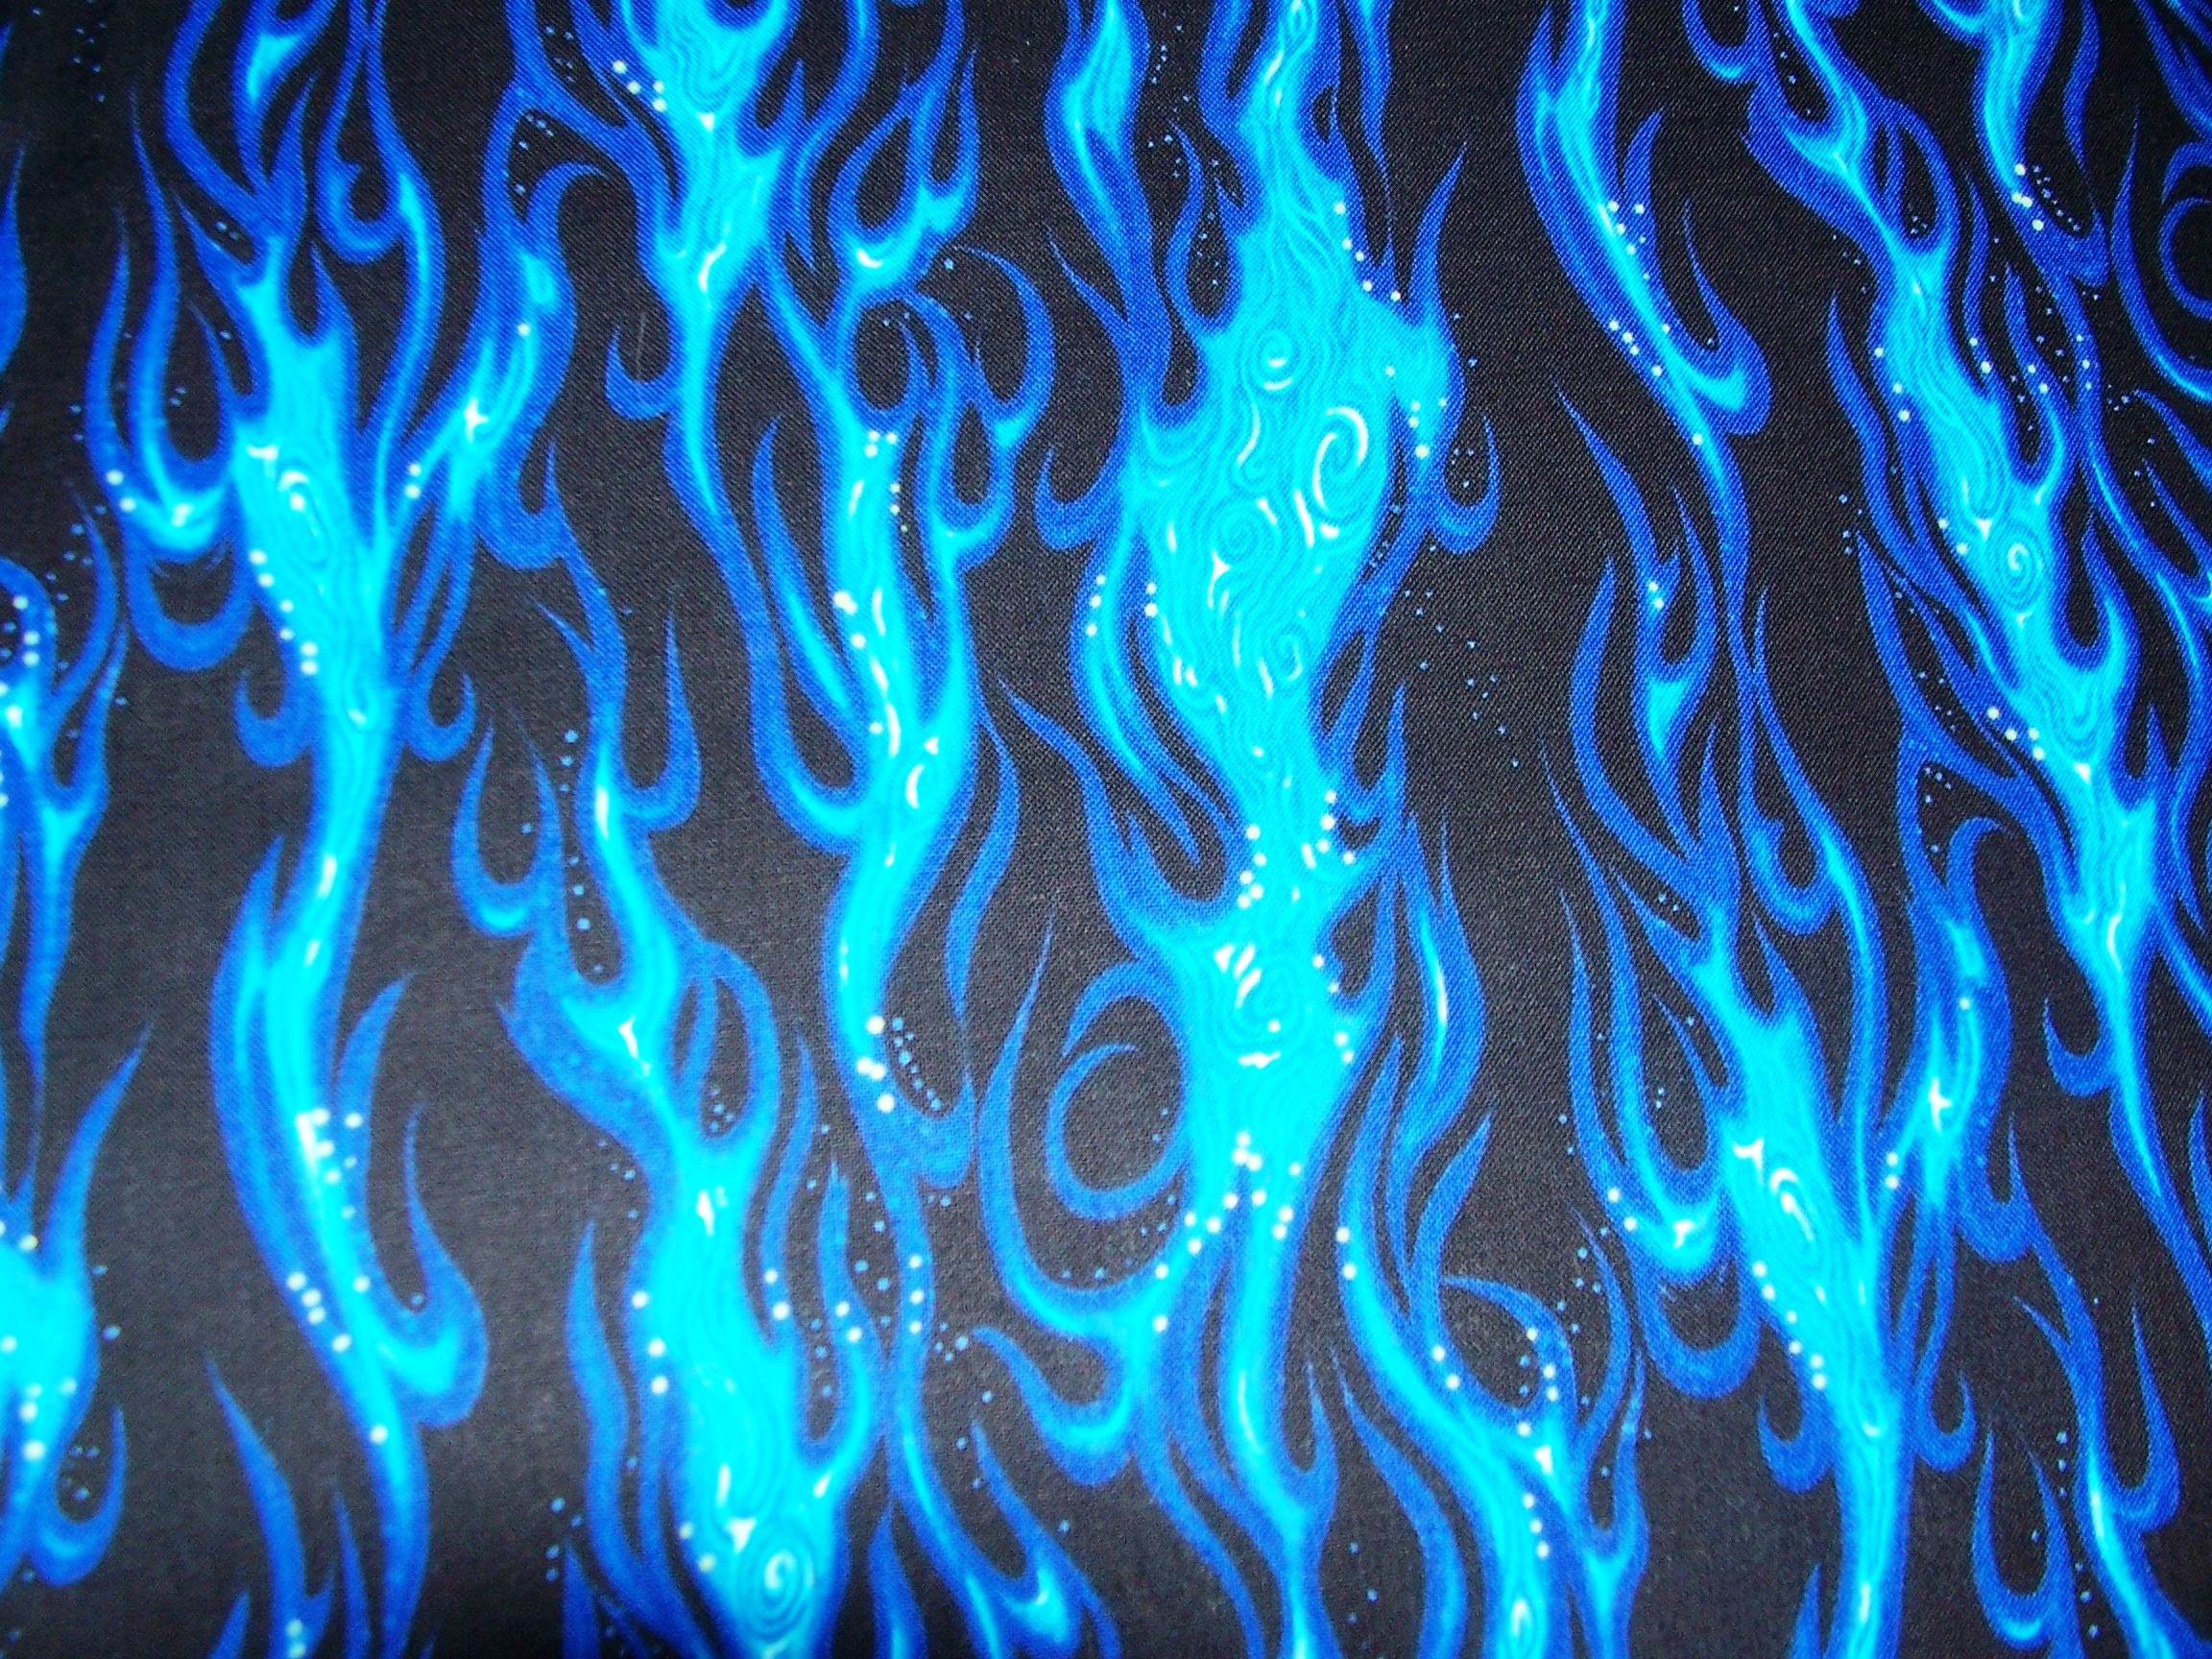 2304x1728 Blue water flames